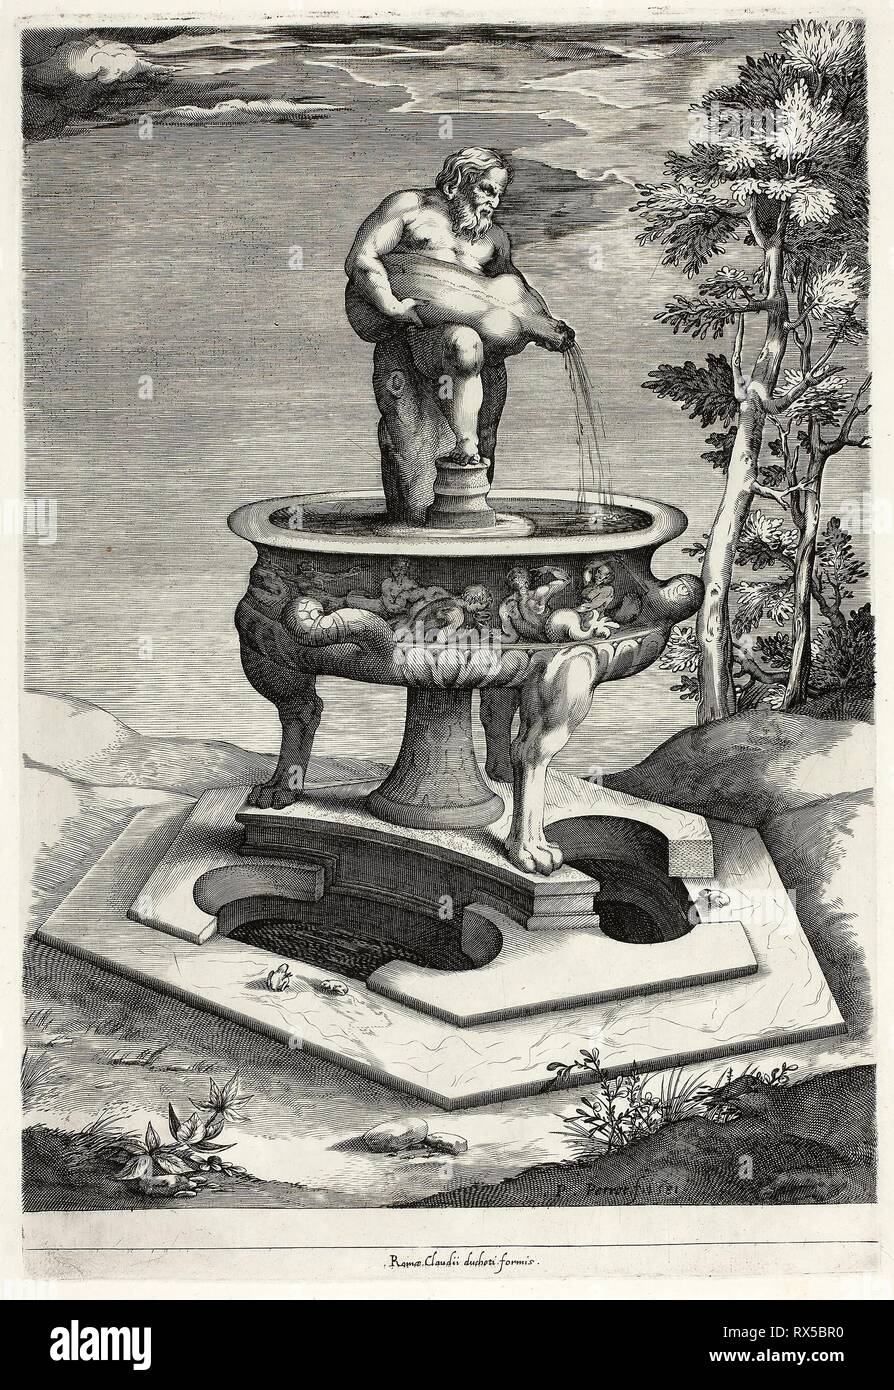 Fountain with Silenus in the Garden of the Cesi Palace near Rome. Pieter Perret (Flemish, 1555-1639); published by Claudio Duchetti. Date: 1581. Dimensions: 332 × 239 mm (image); 351 × 239 mm (plate); 541 × 425 mm (sheet). Engraving in black on ivory laid paper. Origin: Flanders. Museum: The Chicago Art Institute. Stock Photo